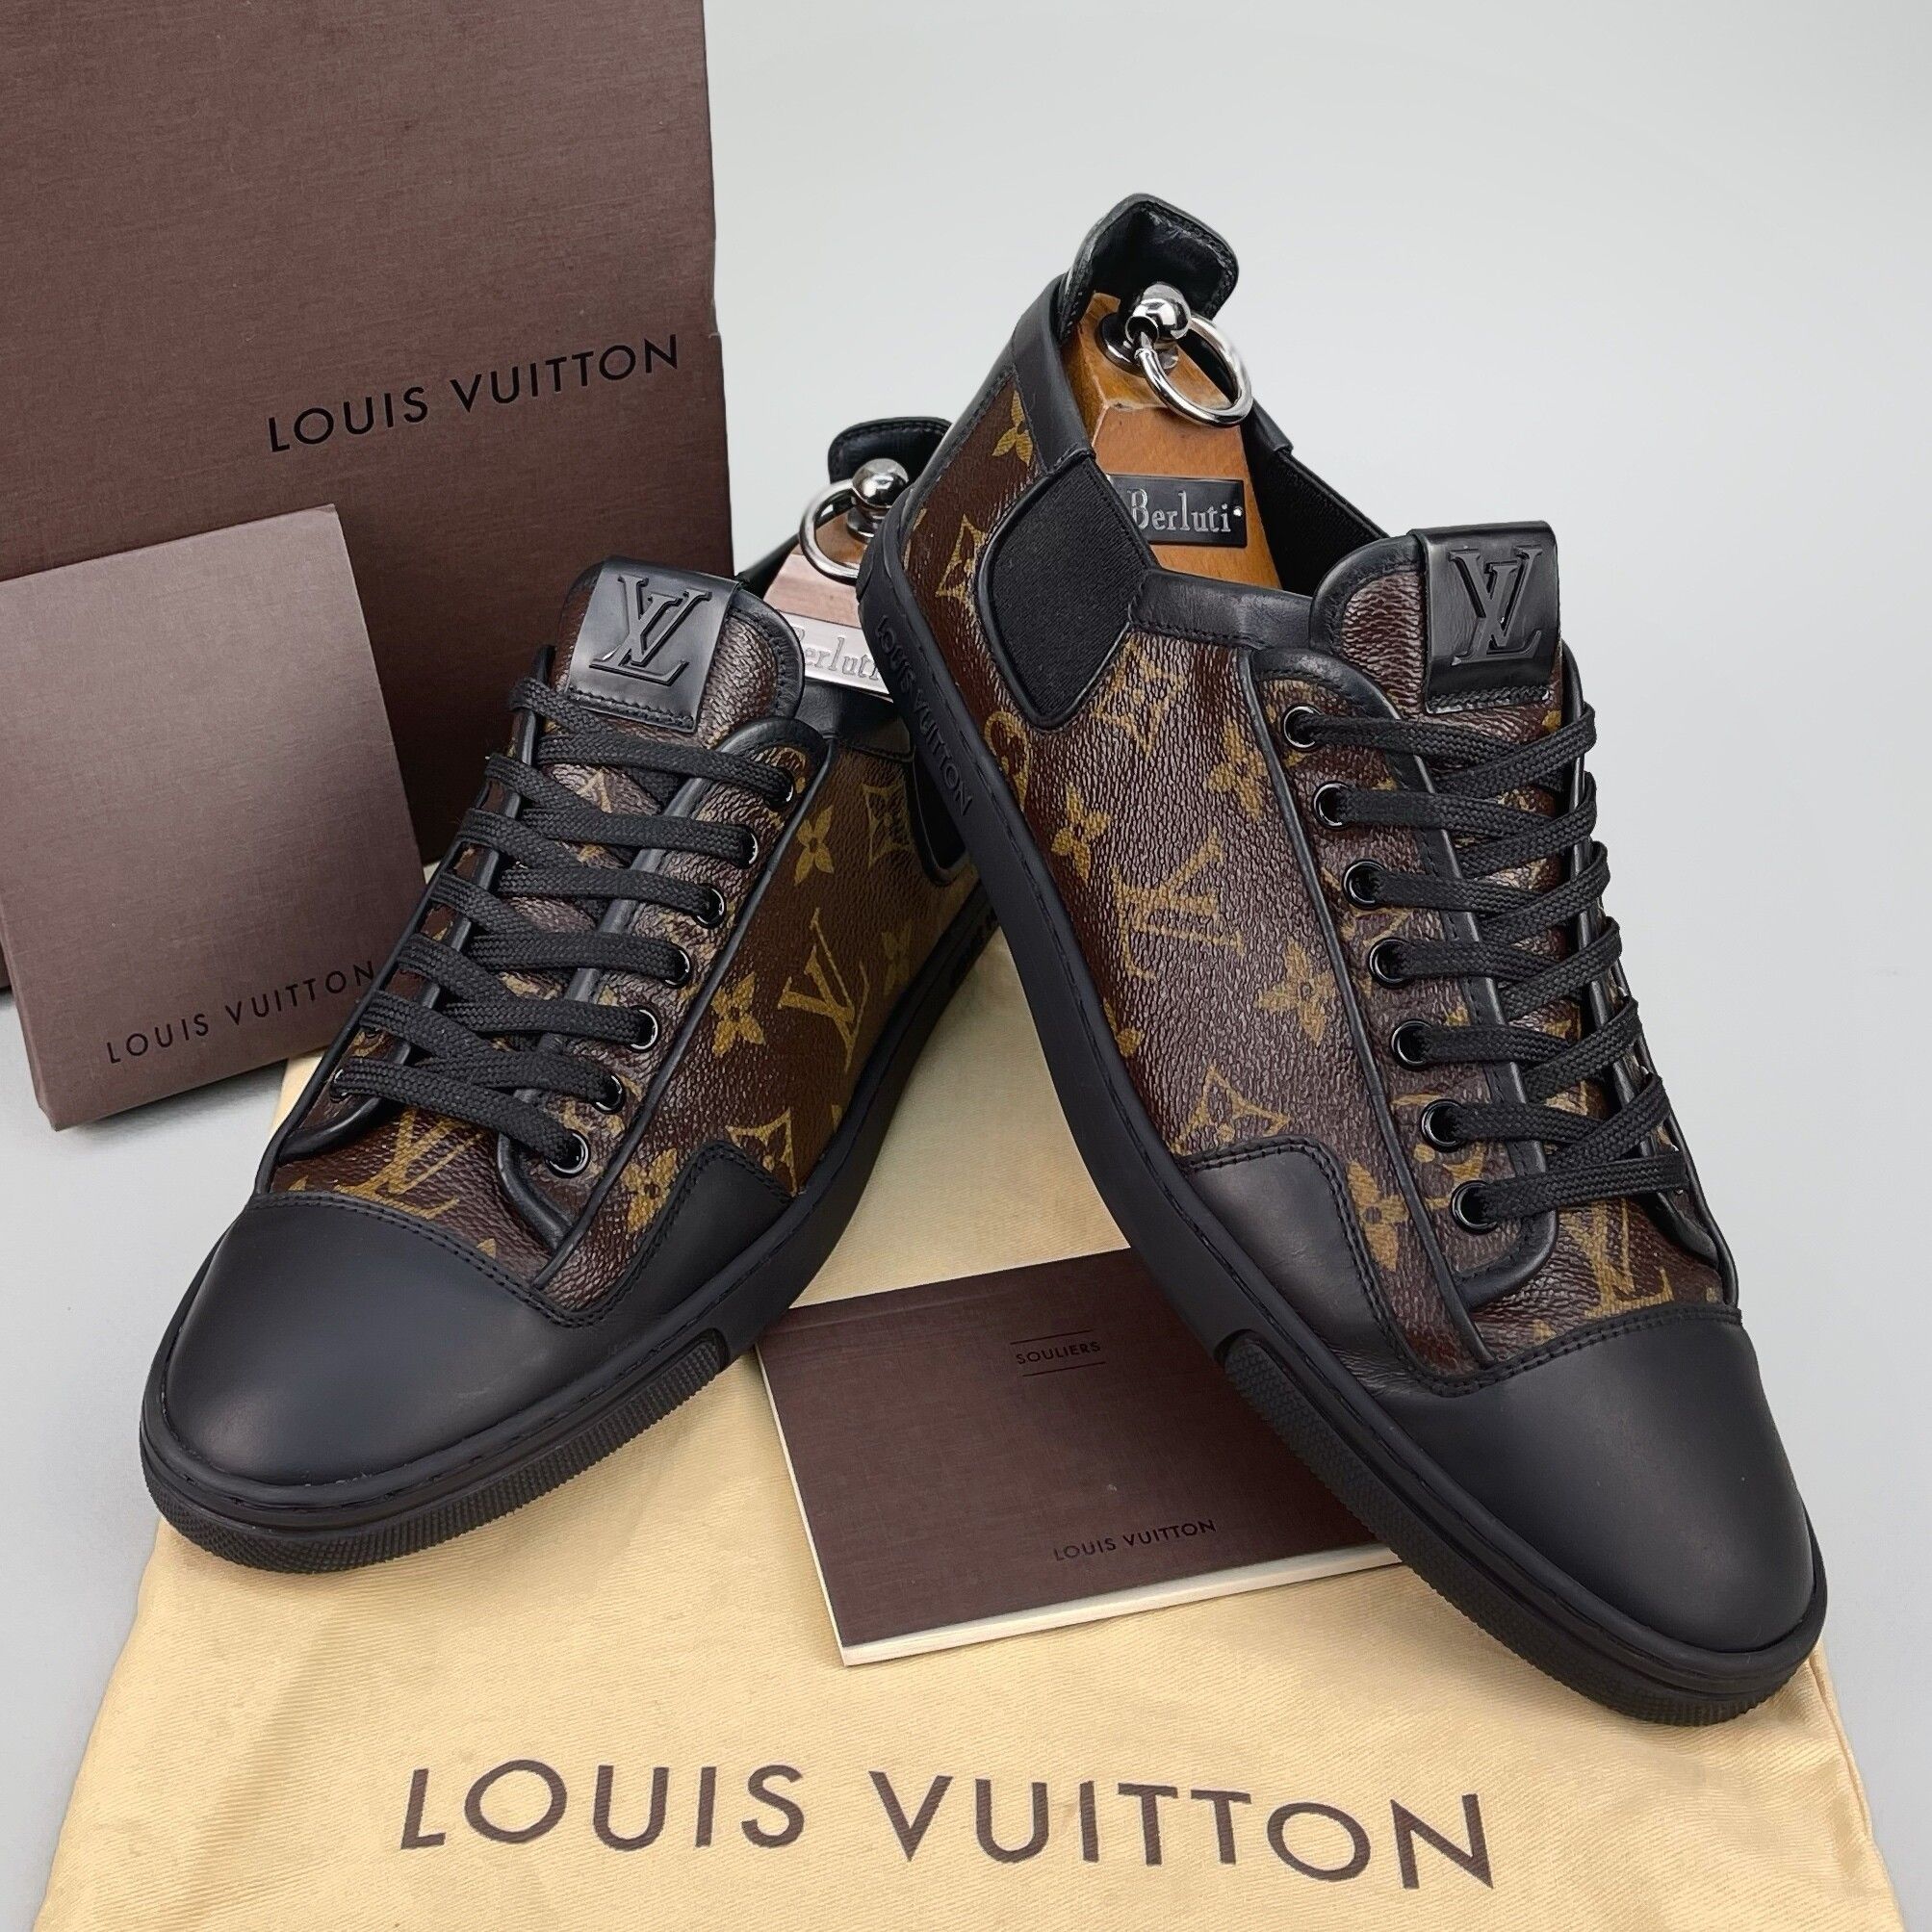 Louis Vuitton Black/Brown Leather and Monogram Canvas Slalom Low-Top  Sneakers Size 41